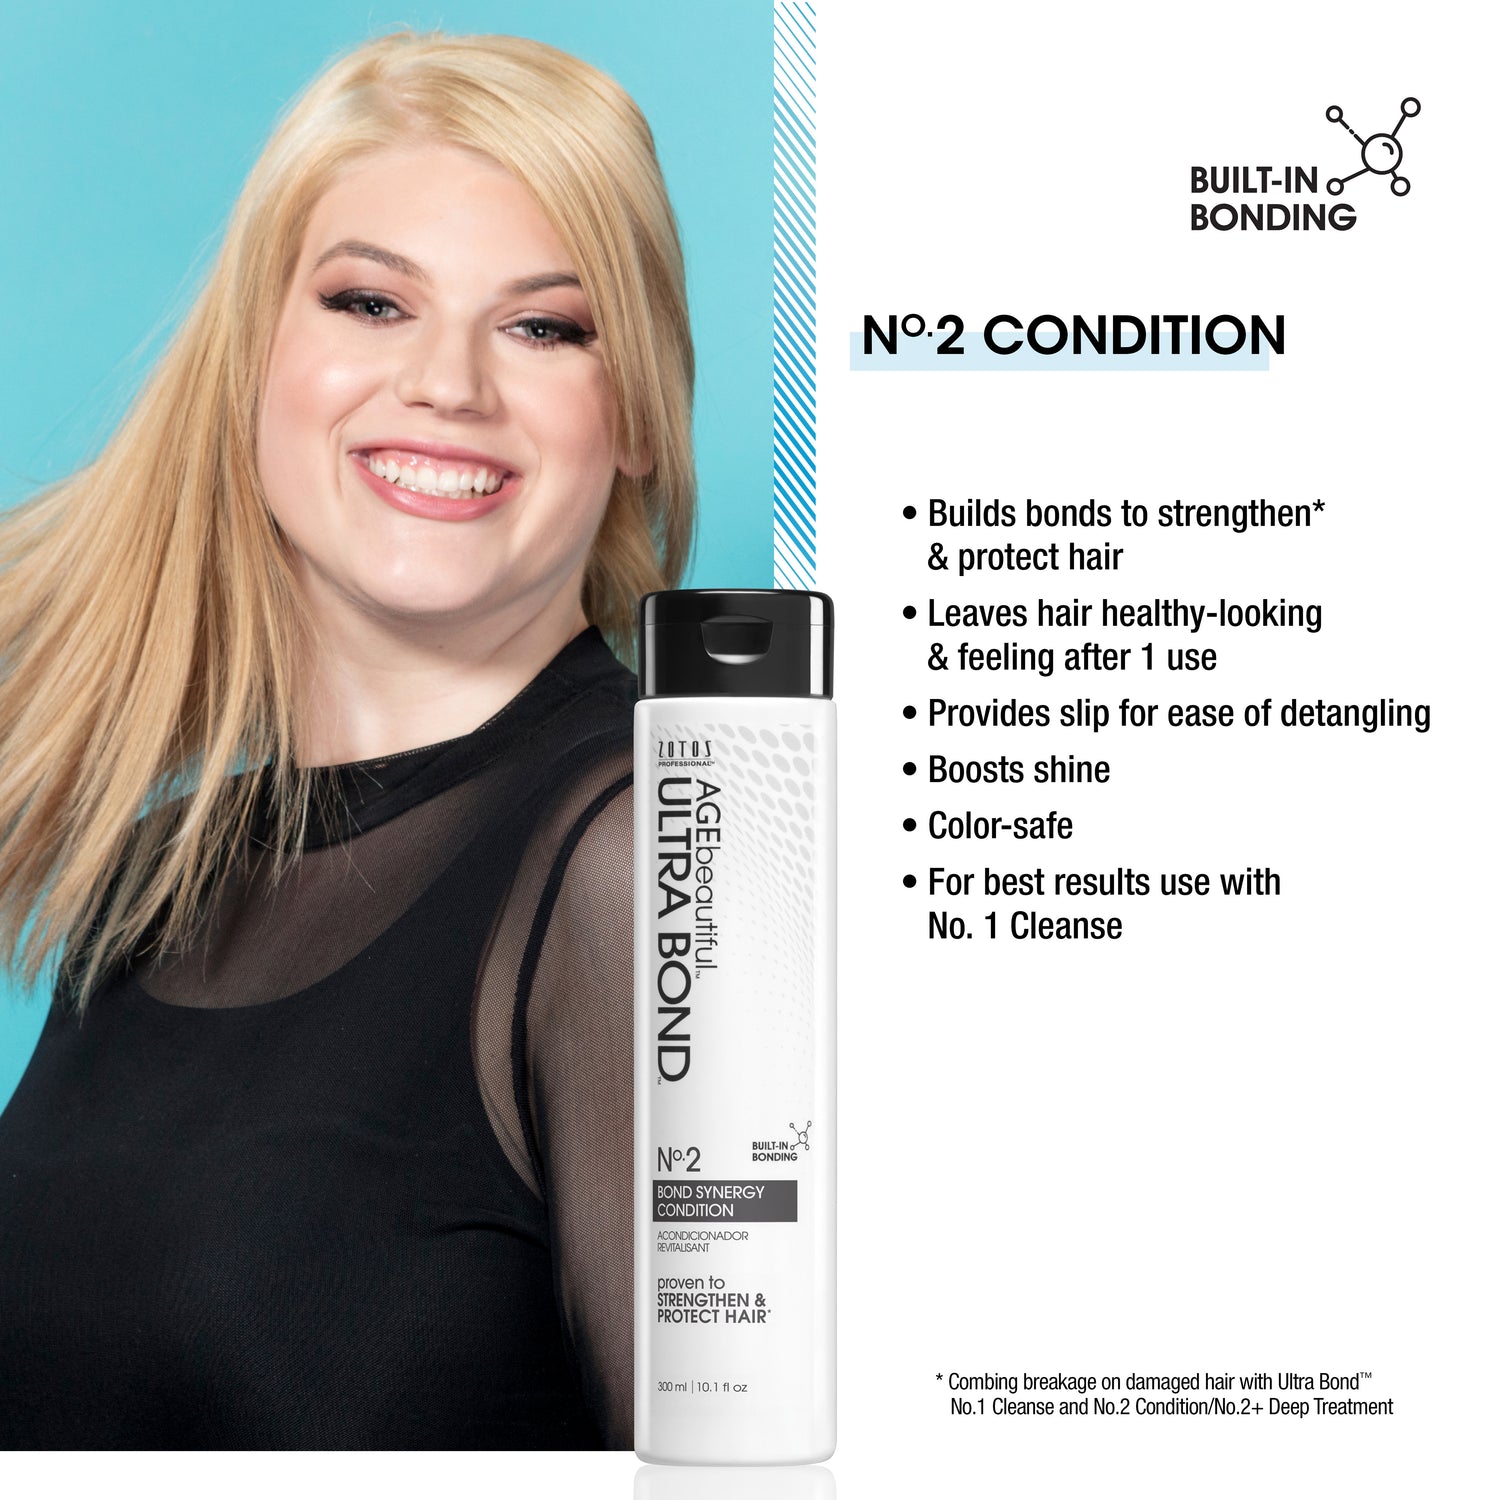 Ultra Bond no.2 condition leaves hair healthy-looking after one use